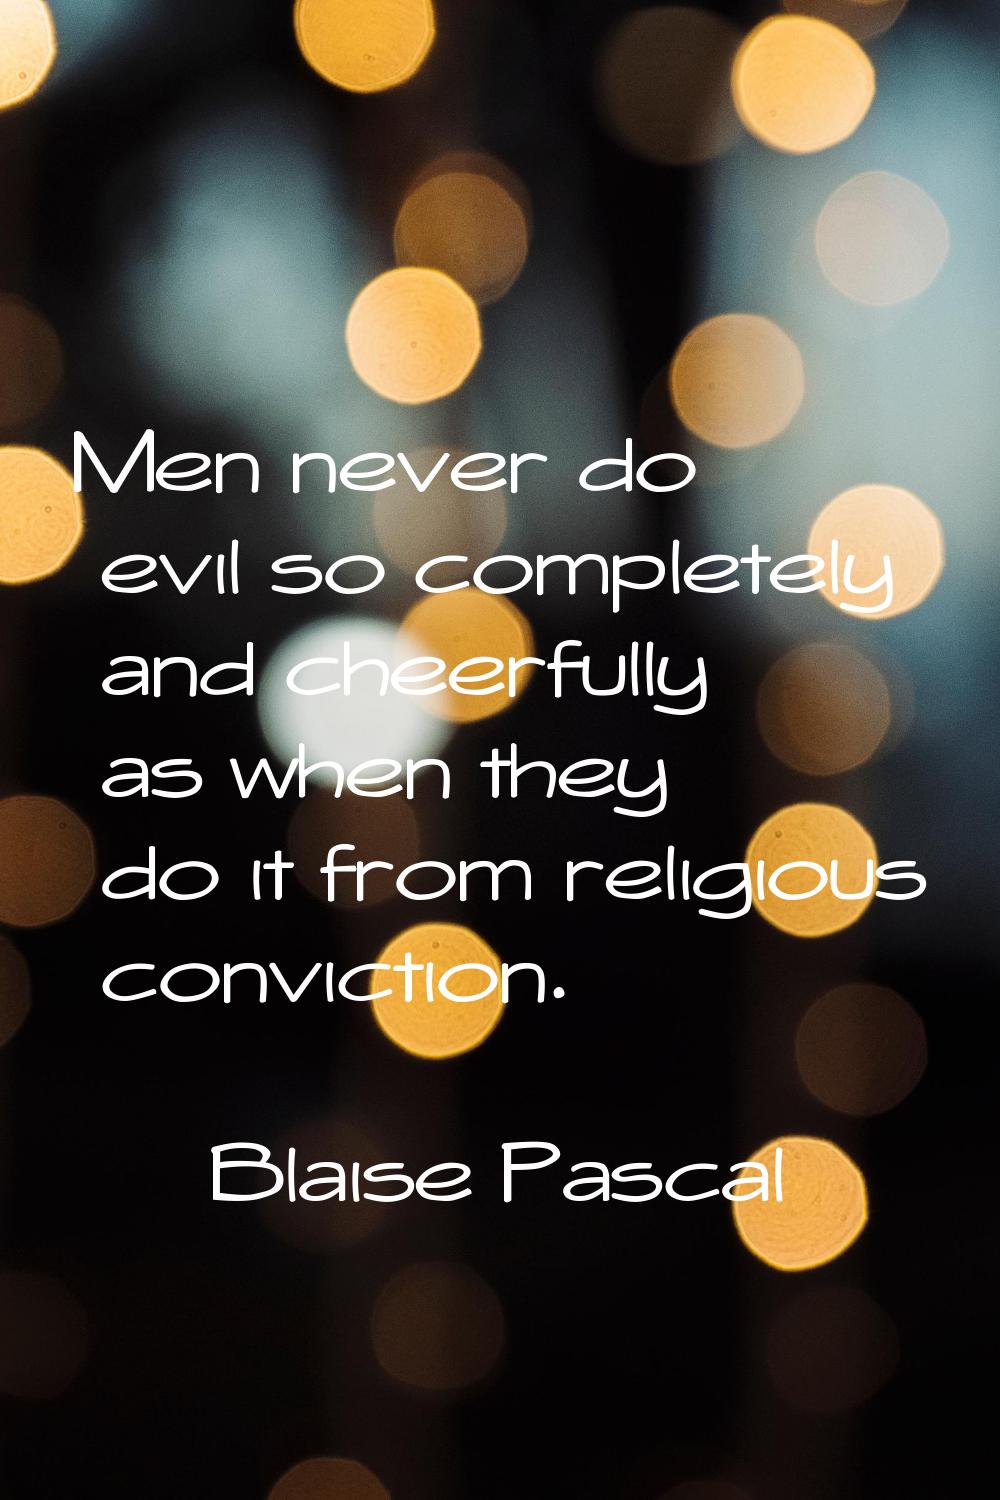 Men never do evil so completely and cheerfully as when they do it from religious conviction.